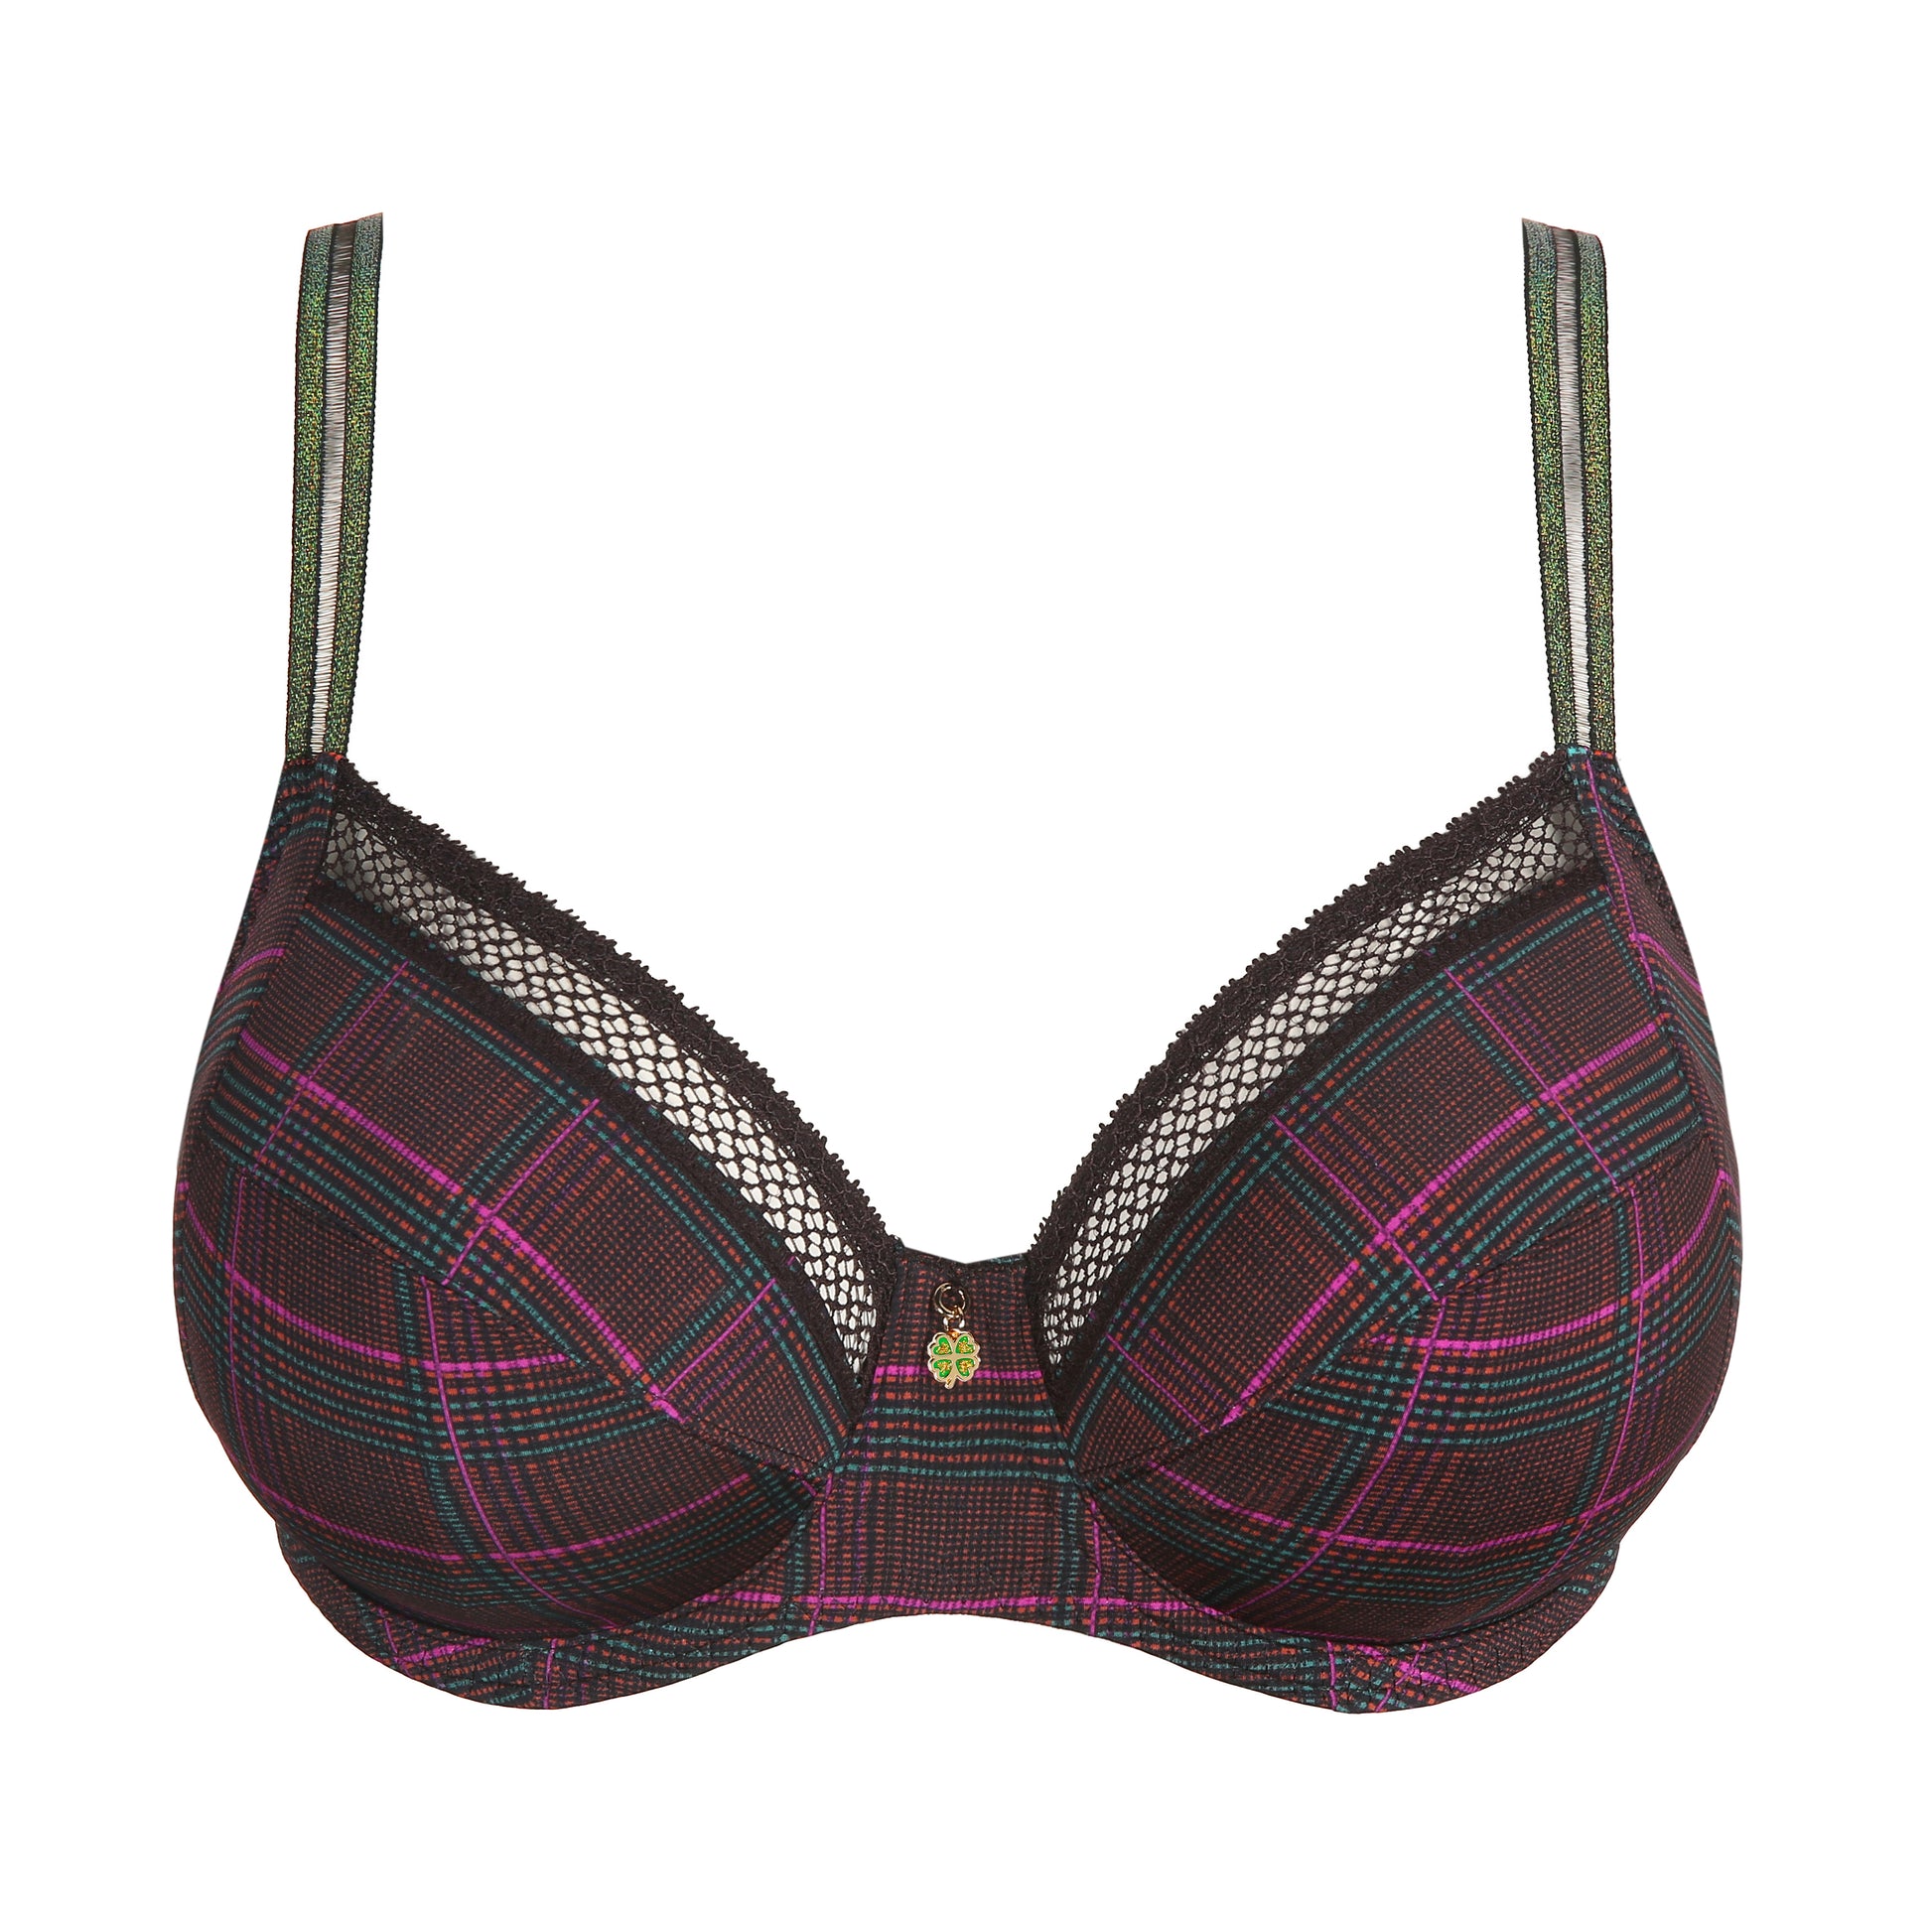 PrimaDonna Twist Princess Bay Full Cup Bra in Italian Check  available at PInned Up Bra Lounge in Markham, Ontario  Canada